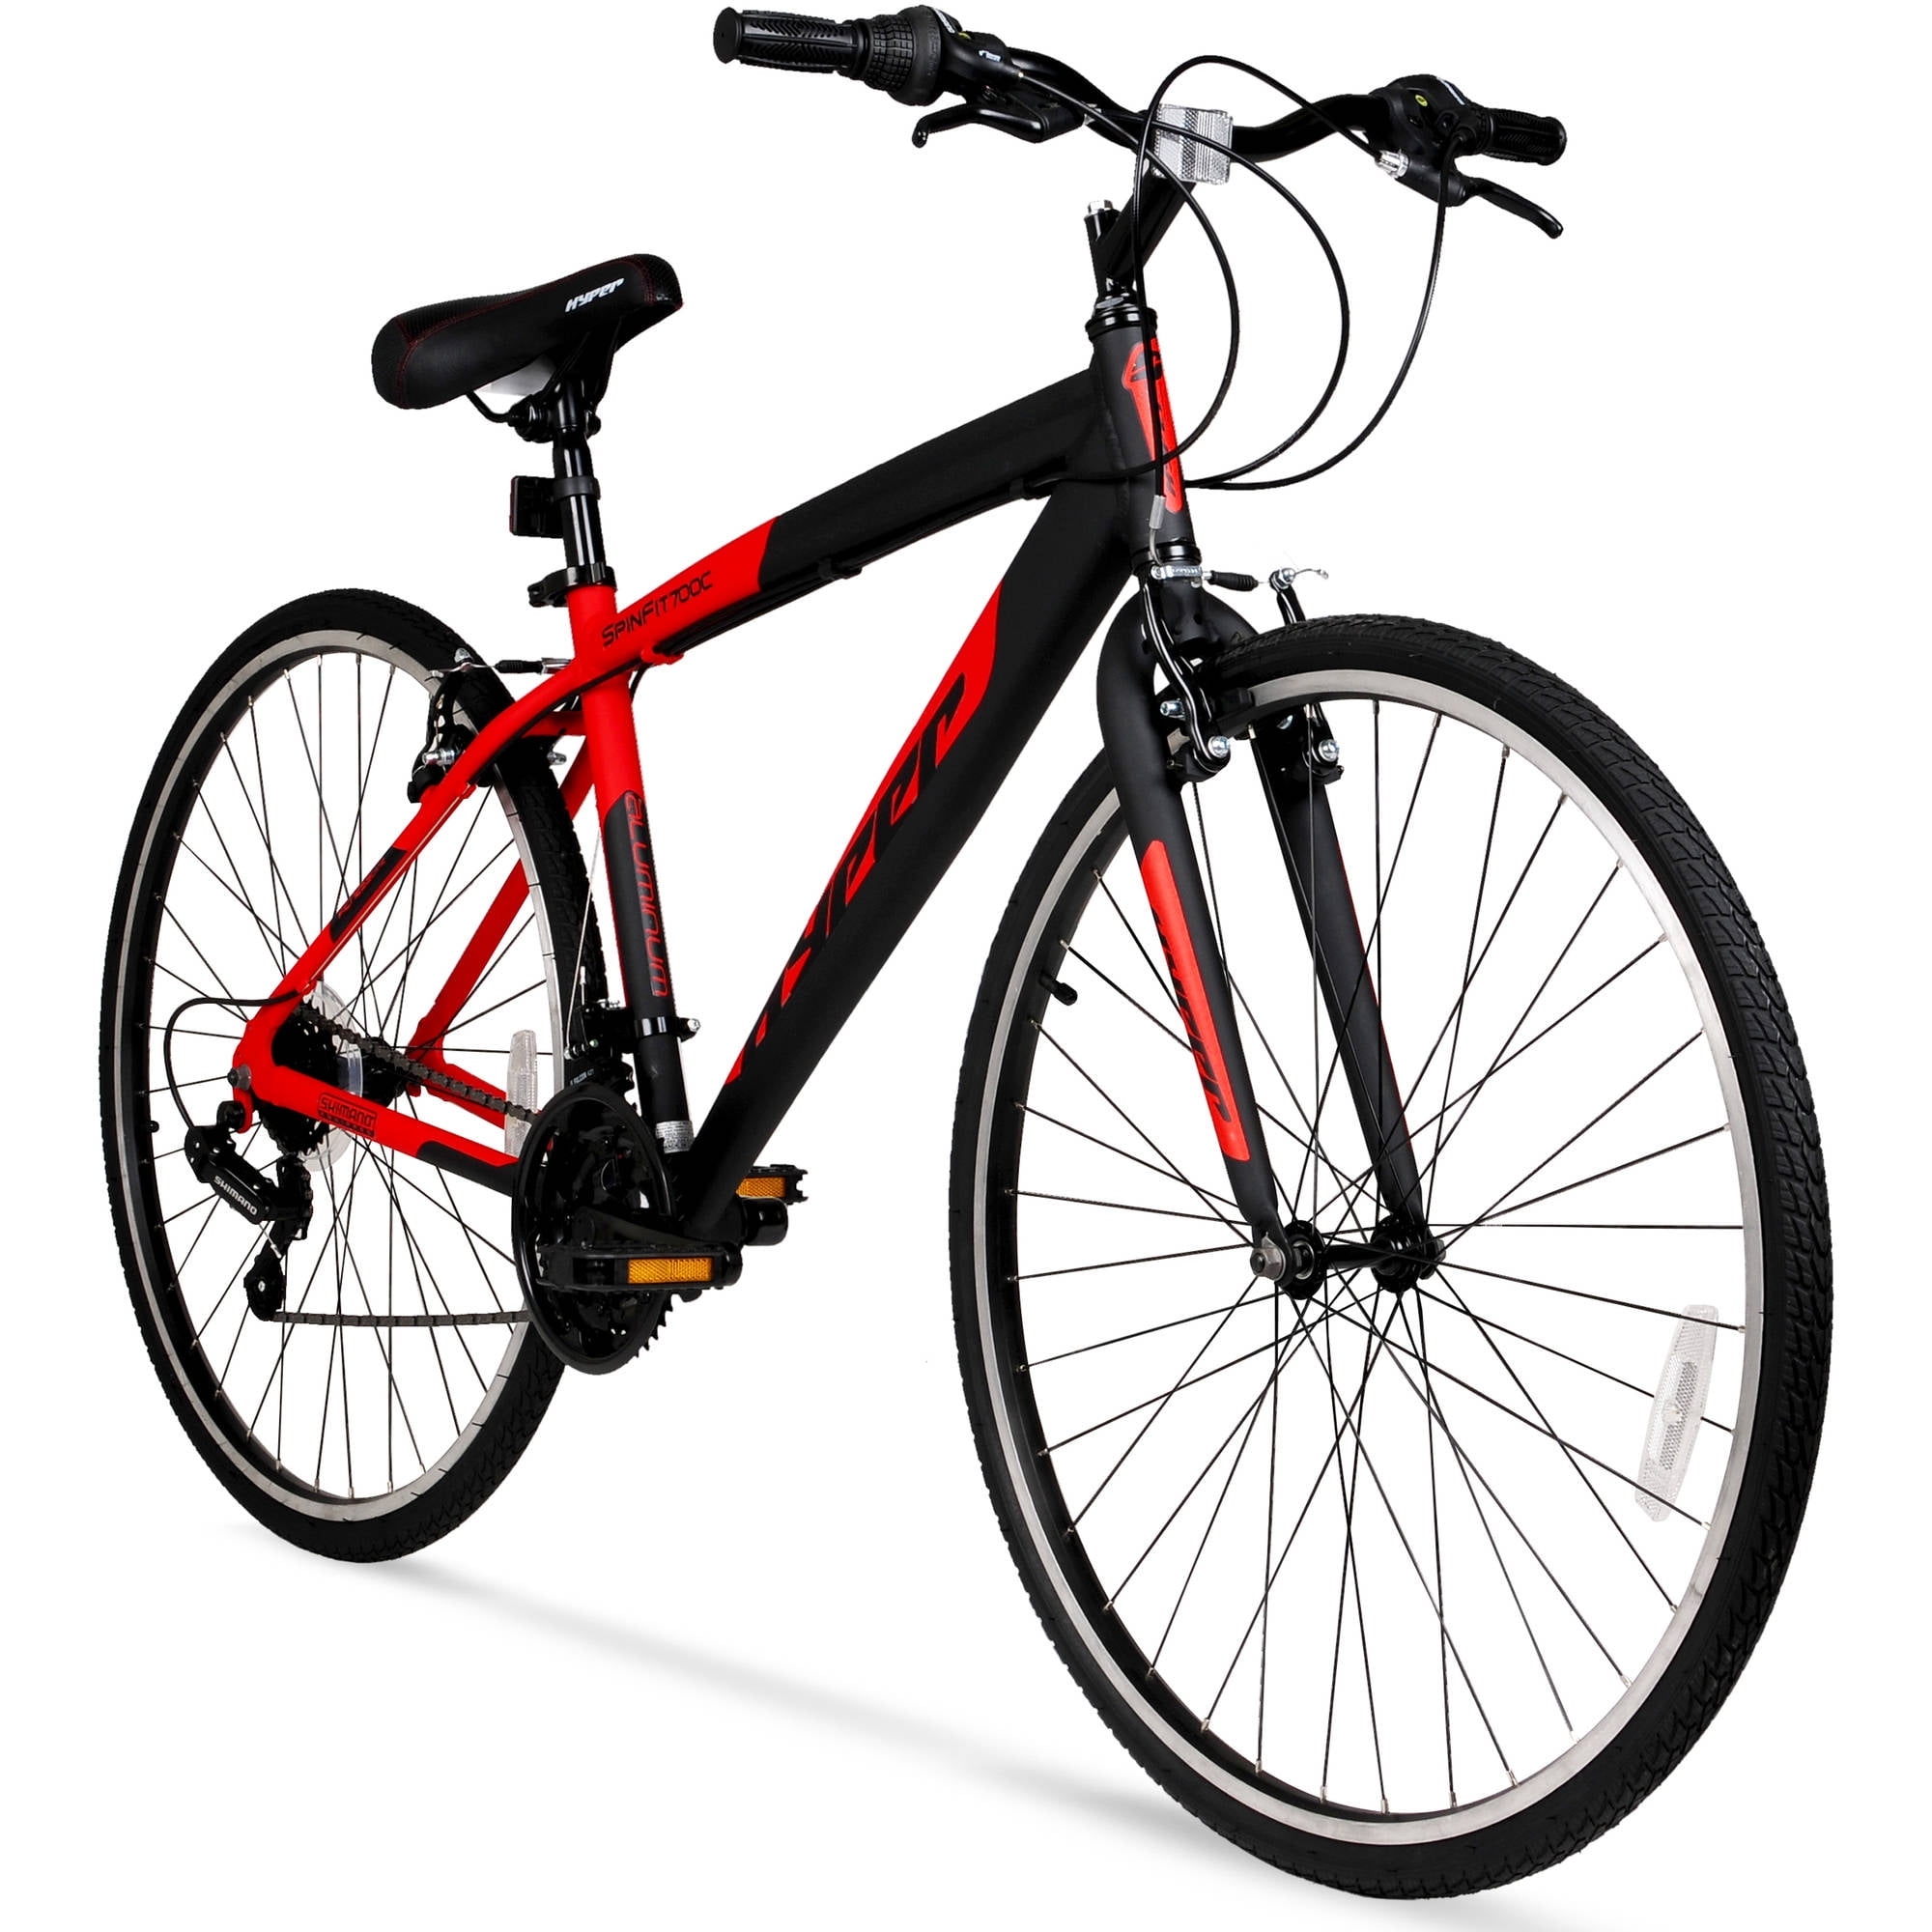 Details about   26" Hyper Men's Mountain Bike Series 7005 Aluminum Frame 21speed with shocks 